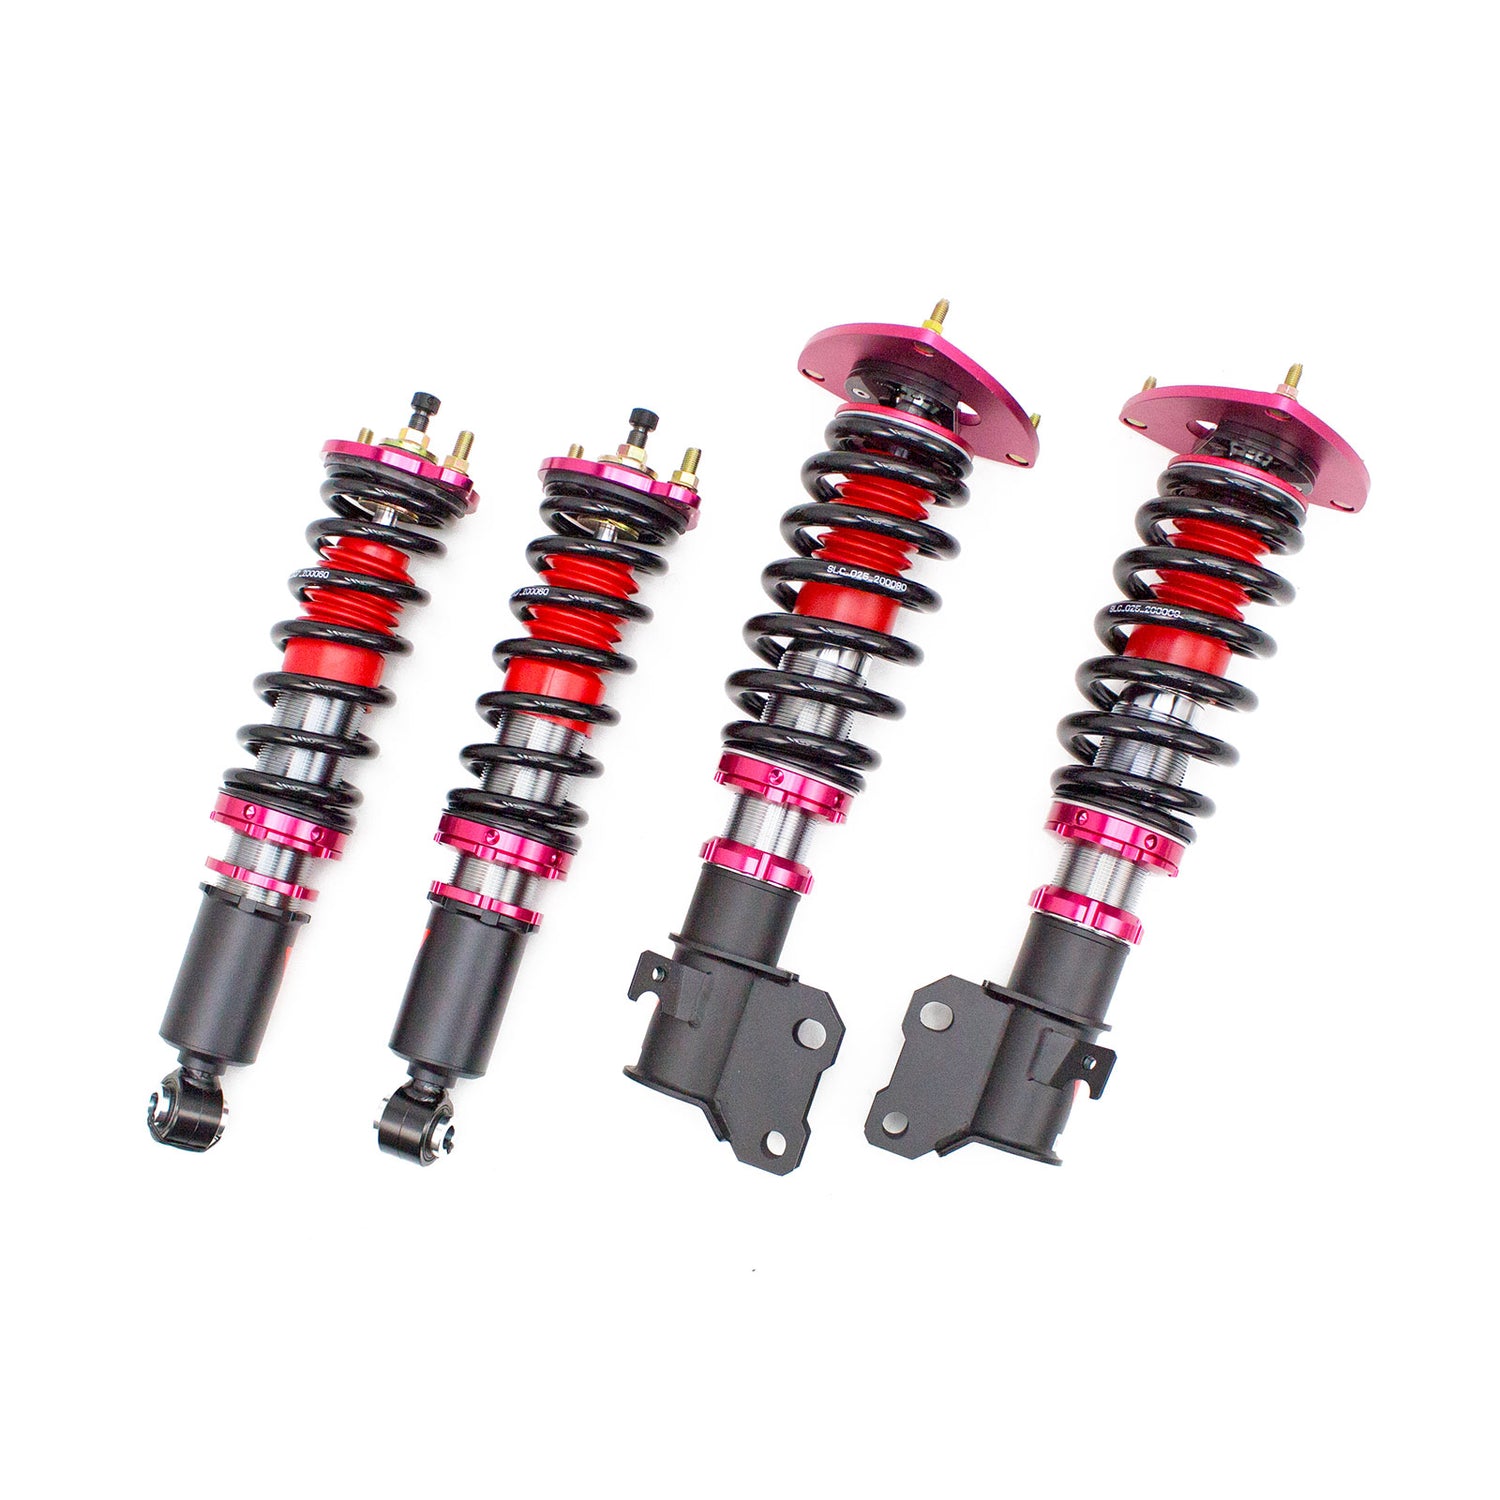 MMX2720 MAXX Coilovers Lowering Kit, Fully Adjustable, Ride Height, 40 Clicks Rebound Settings, Subaru Legacy 05-09 (BL/BP)